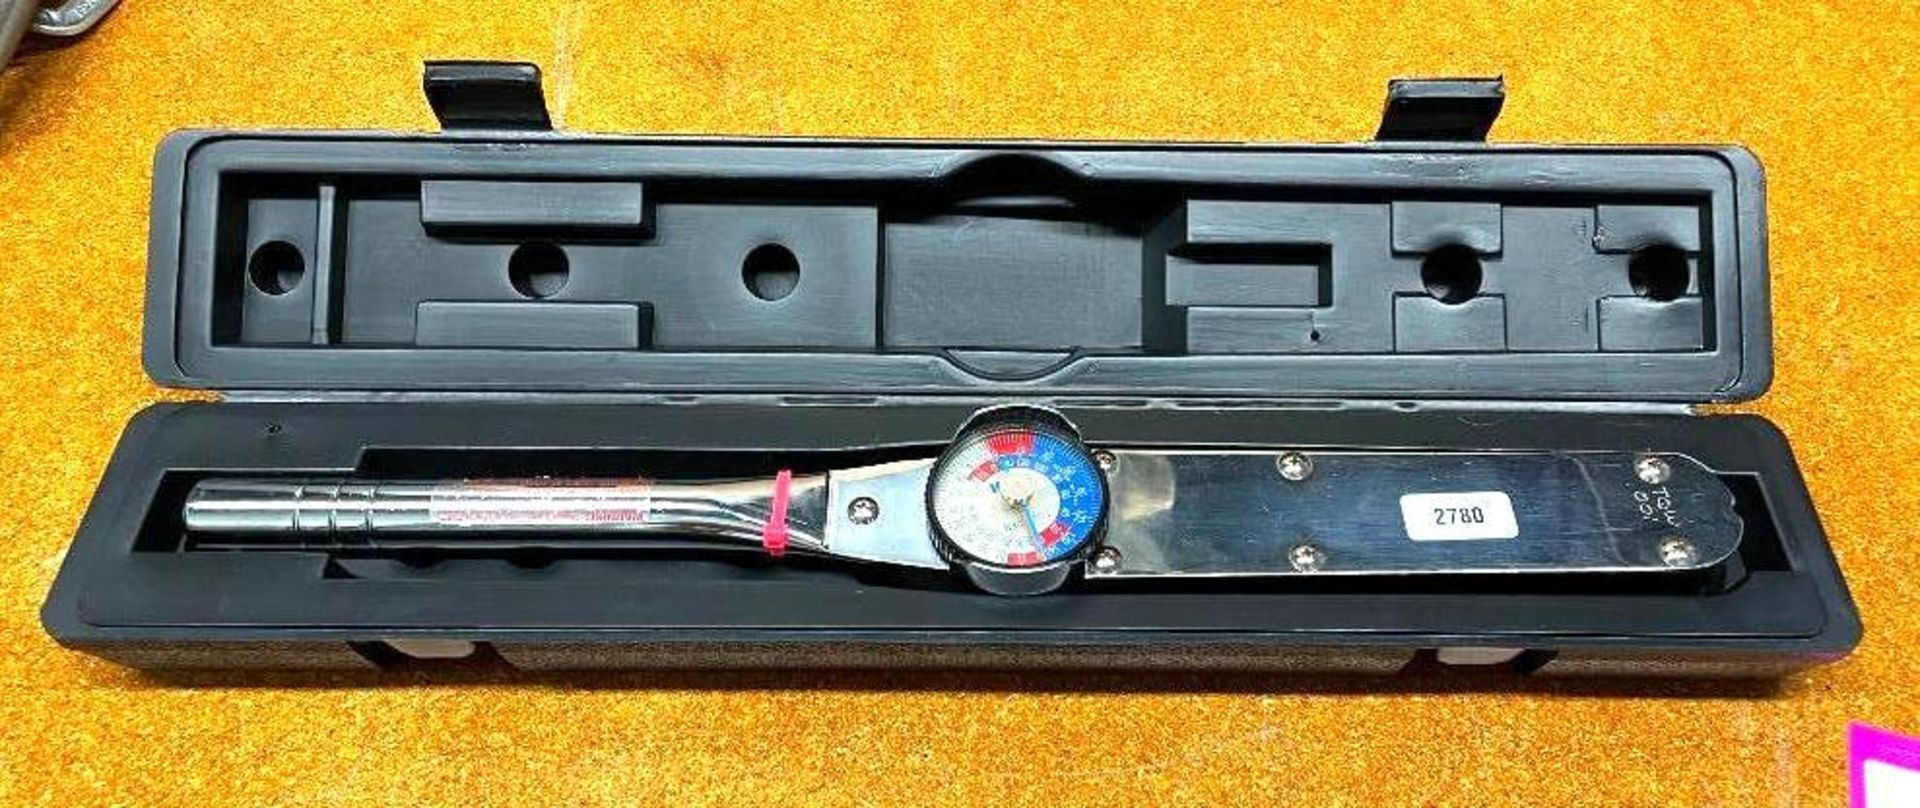 CALIBRATED 1/2" DRIVE TORQUE WRENCH IN NEWTON METERS BRAND/MODEL: CONSOLITDATED DEVICES QTY: 1